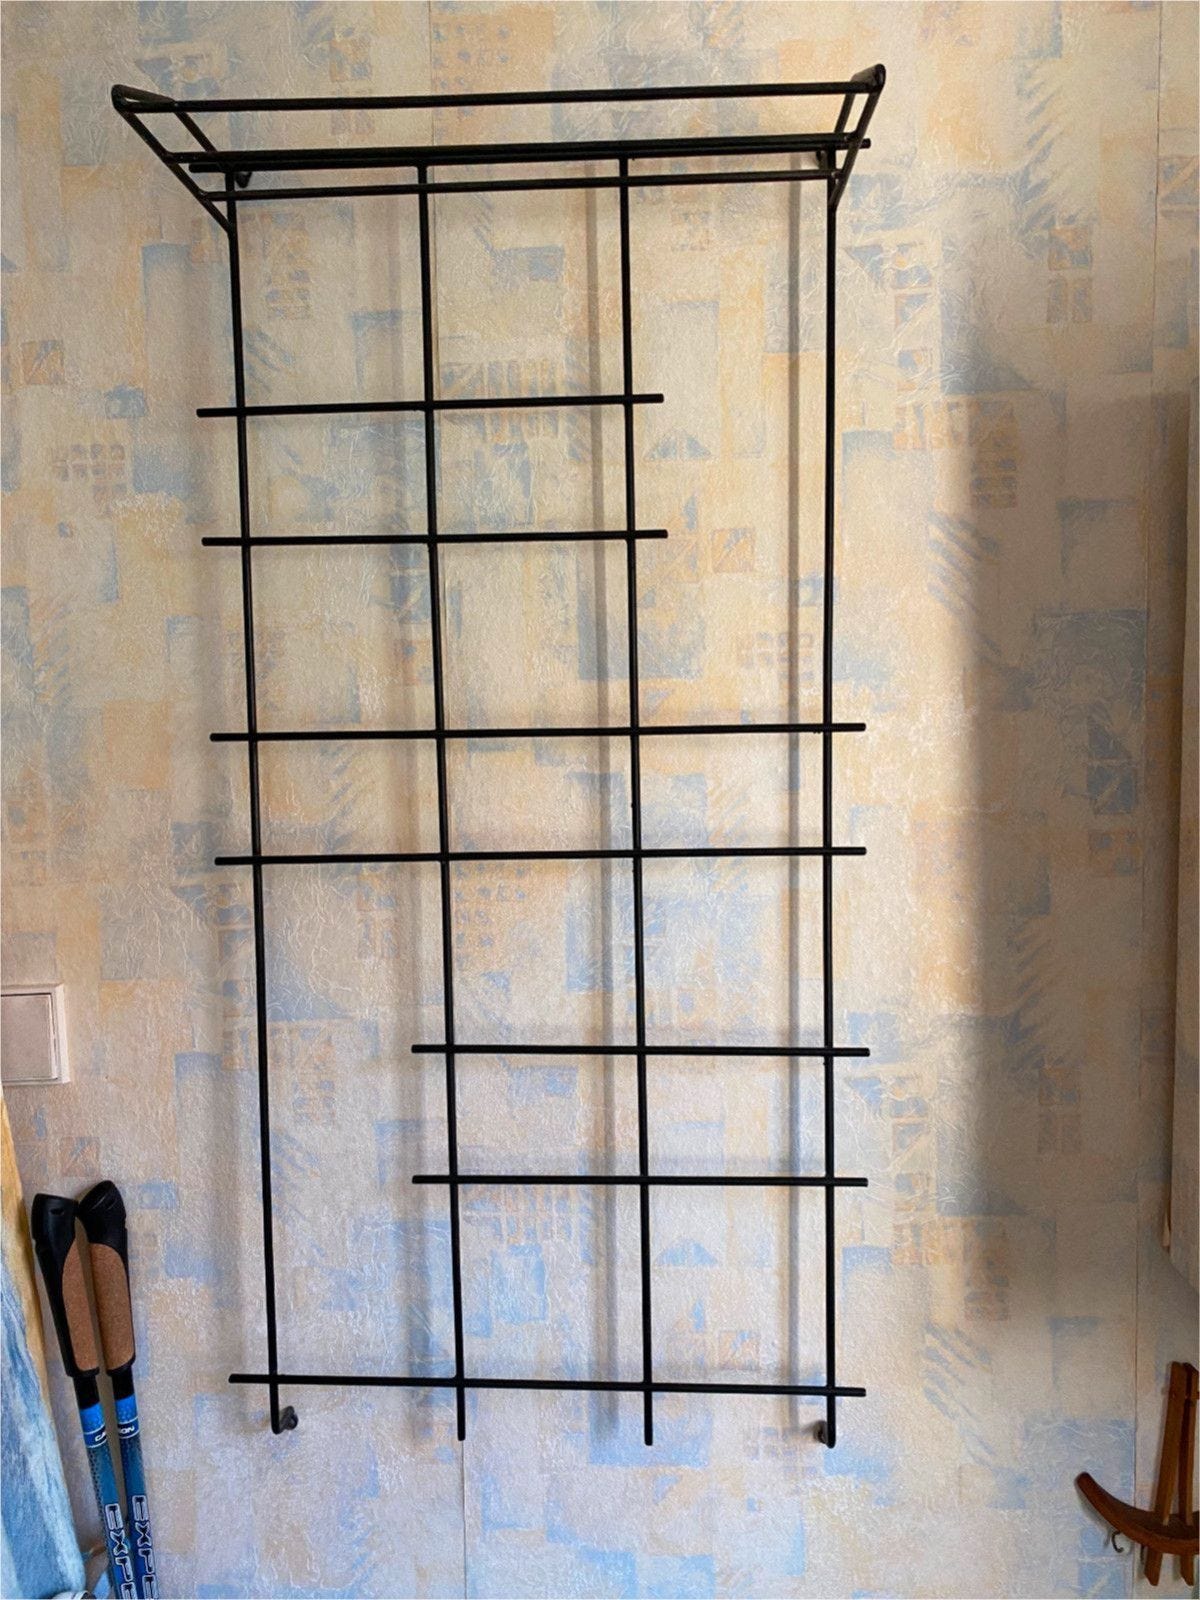 A string wardrobe attached to a wall.